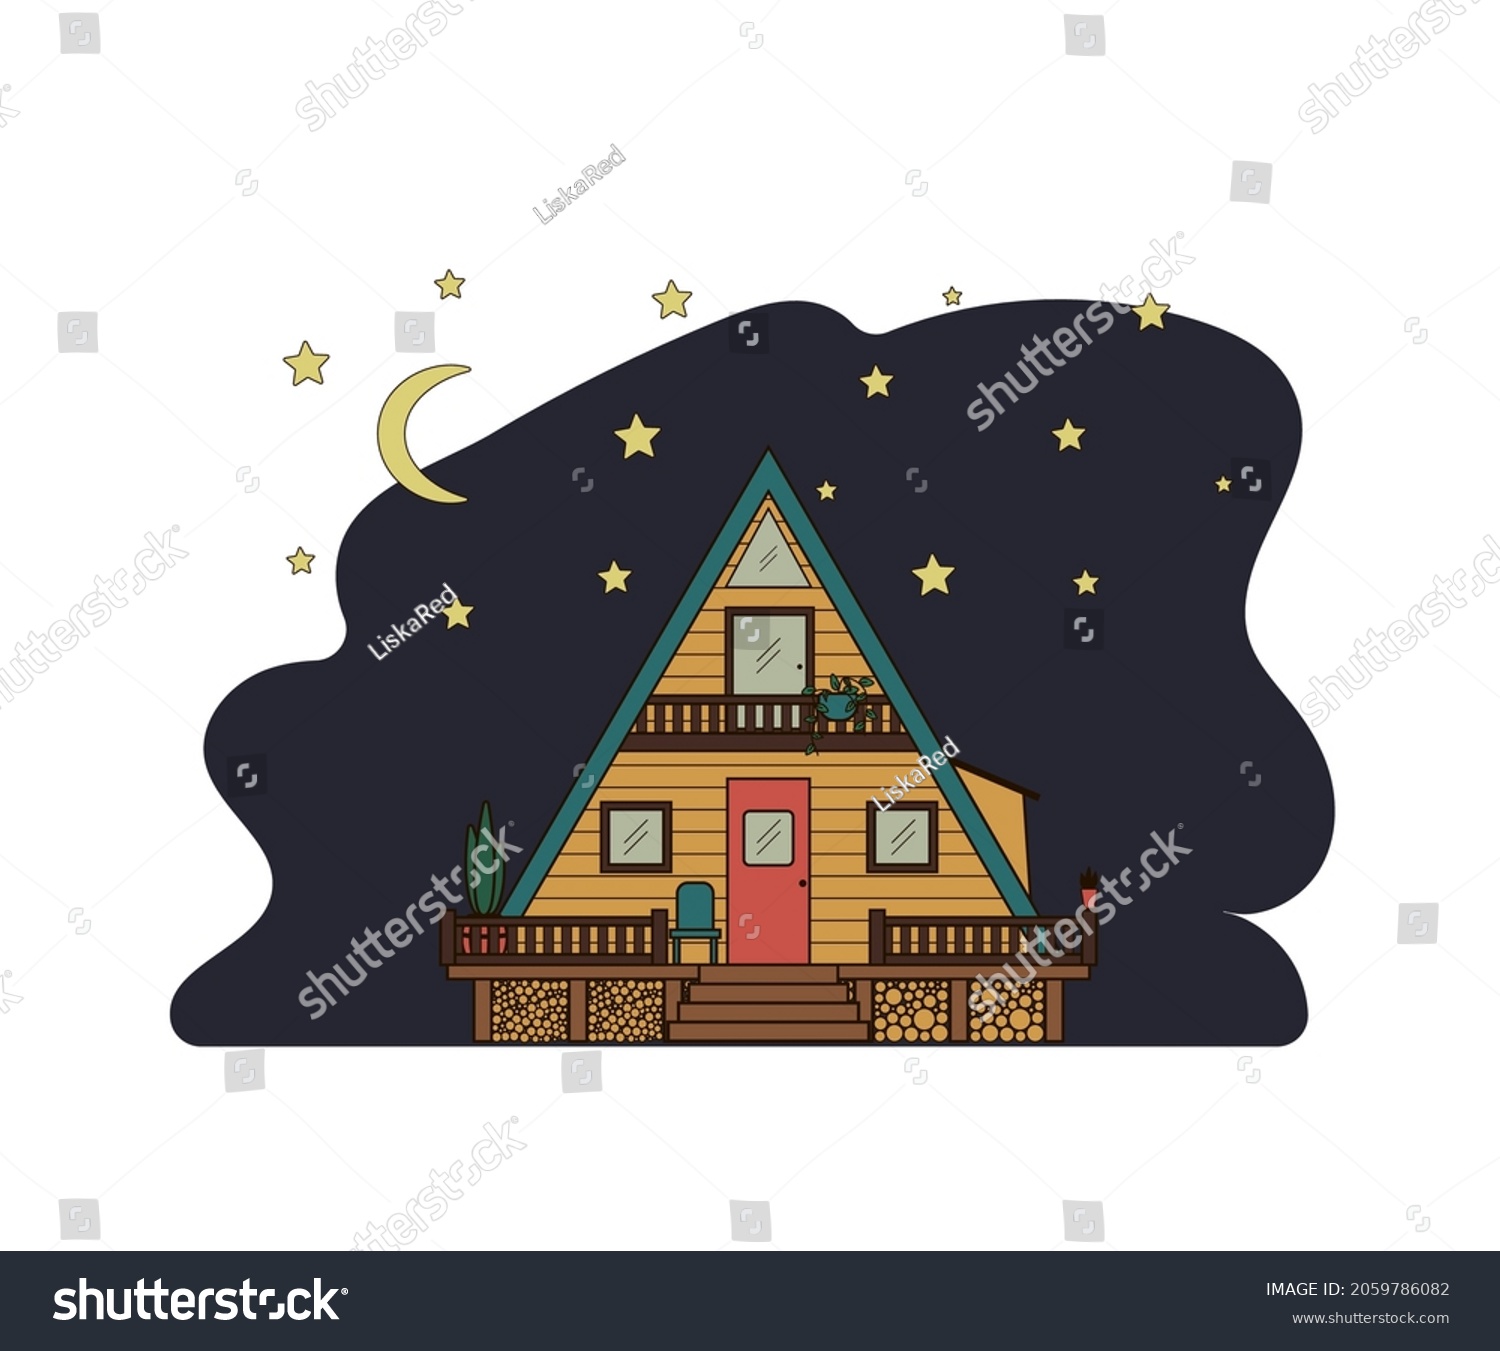 SVG of Wooden cabin on stilts against the background of the night sky and stars. Cozy hut with a veranda and a porch. svg